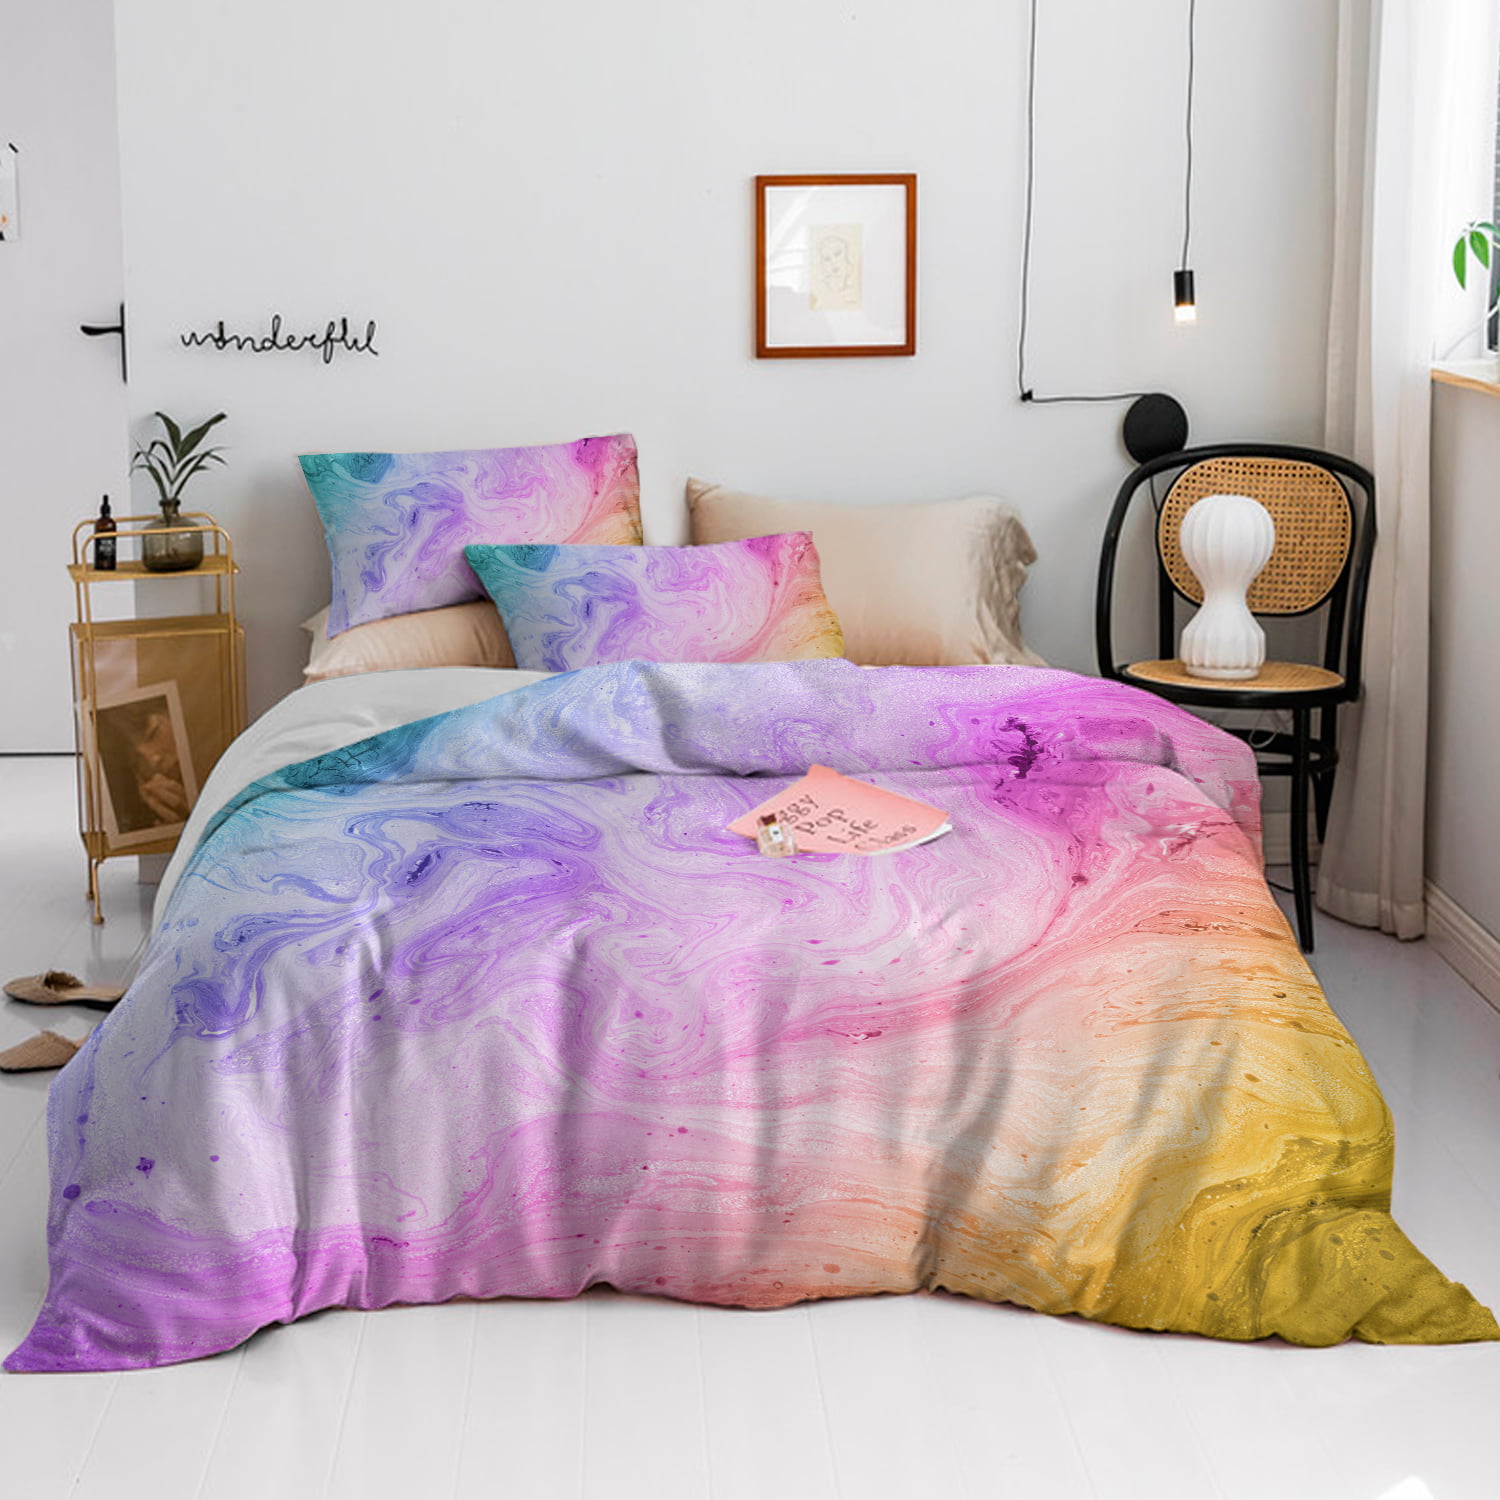 Queen BlessLiving Colorful Marble Bedding Pastel Pink Blue Purple Duvet Cover Set Marble Abstract Art Bed Set 3 Piece Bright Girly Bedspreads